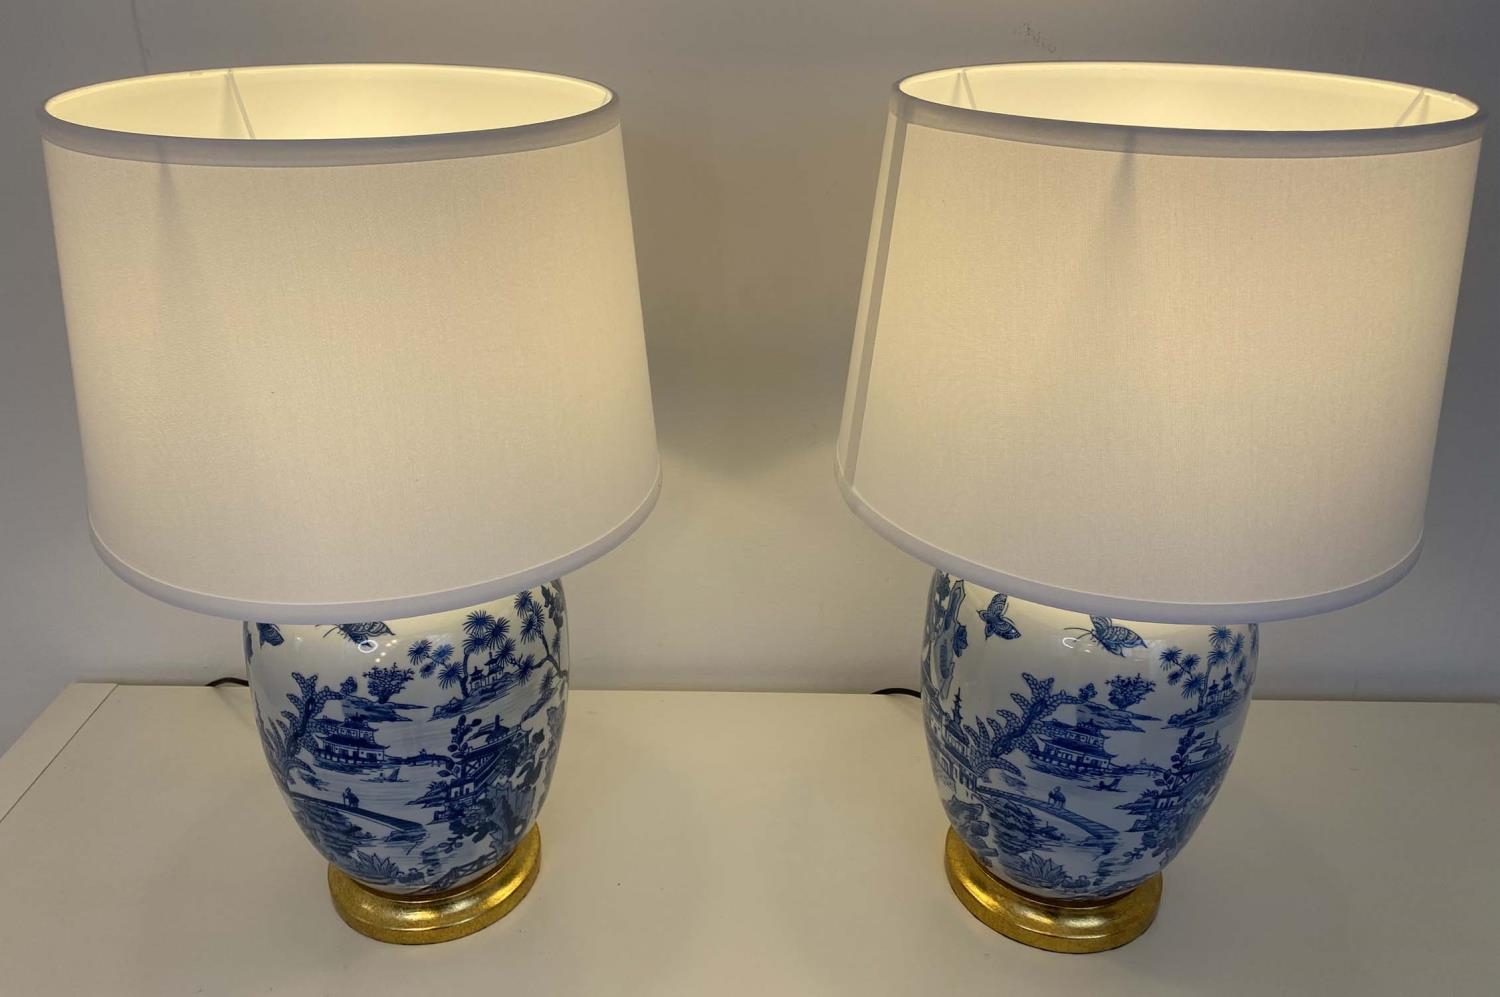 TABLE LAMPS, pair, 62cm H x 38cm diam., Chinese export style blue and white ceramic, neutral shades, - Image 2 of 3